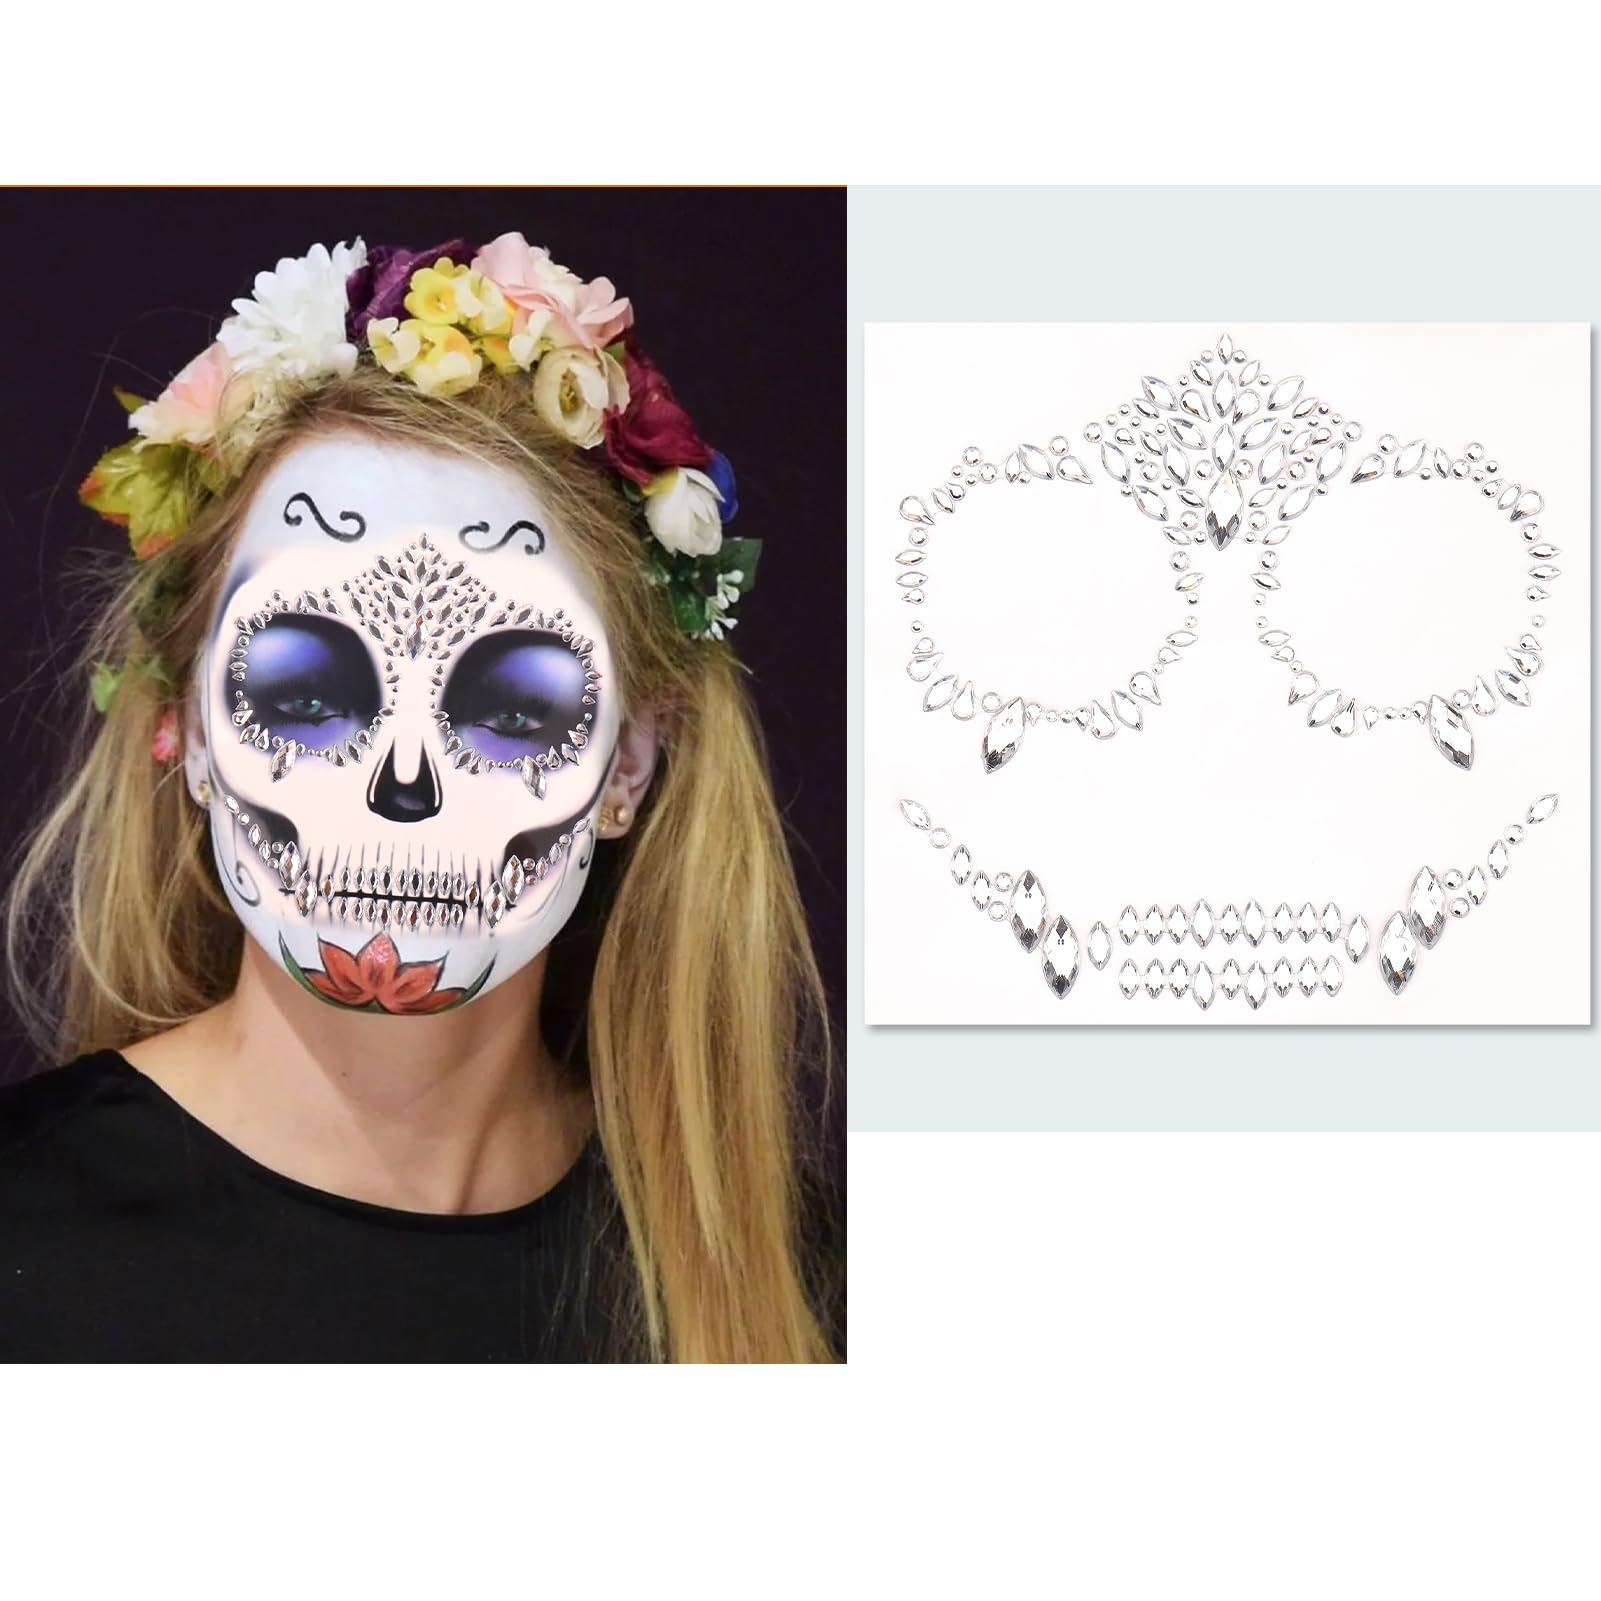 Vodolo Halloween Face Jewels Stickers,Hallowen Face Gems Decorations,Day of The Dead Skull Temporary Face Tattoos,Face Makeup Rhinestone Stick on for Adults and Kids